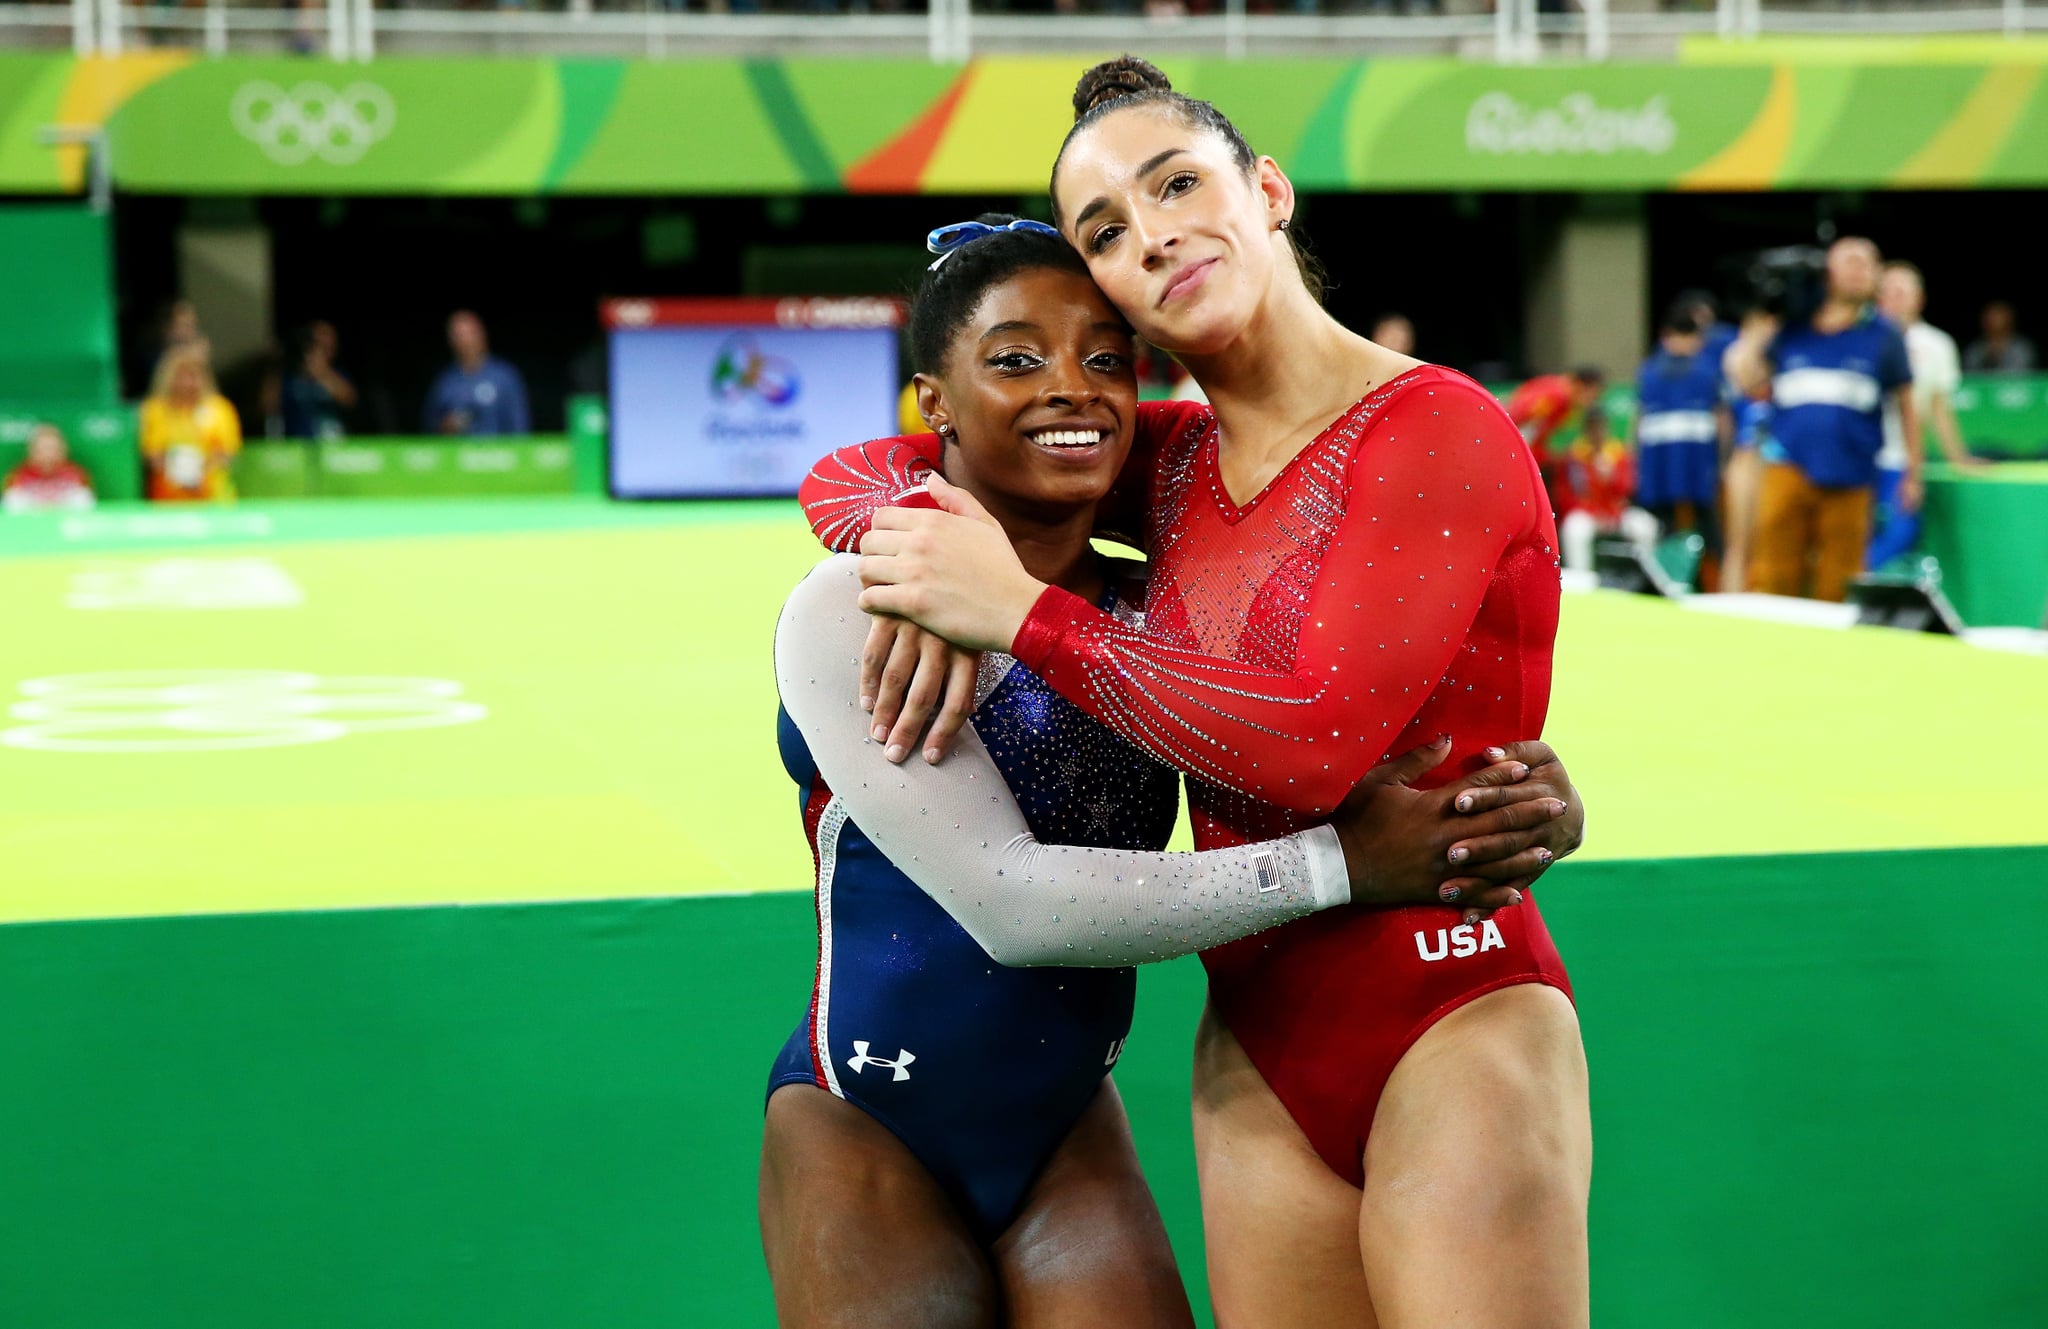 RIO DE JANEIRO, BRAZIL - AUGUST 11:  Simone Biles (L) of the United States waits for the score after competing on the floor with Alexandra Raisman (R) during the Women's Individual All Around Final on Day 6 of the 2016 Rio Olympics at Rio Olympic Arena on August 11, 2016 in Rio de Janeiro, Brazil.  (Photo by Alex Livesey/Getty Images)